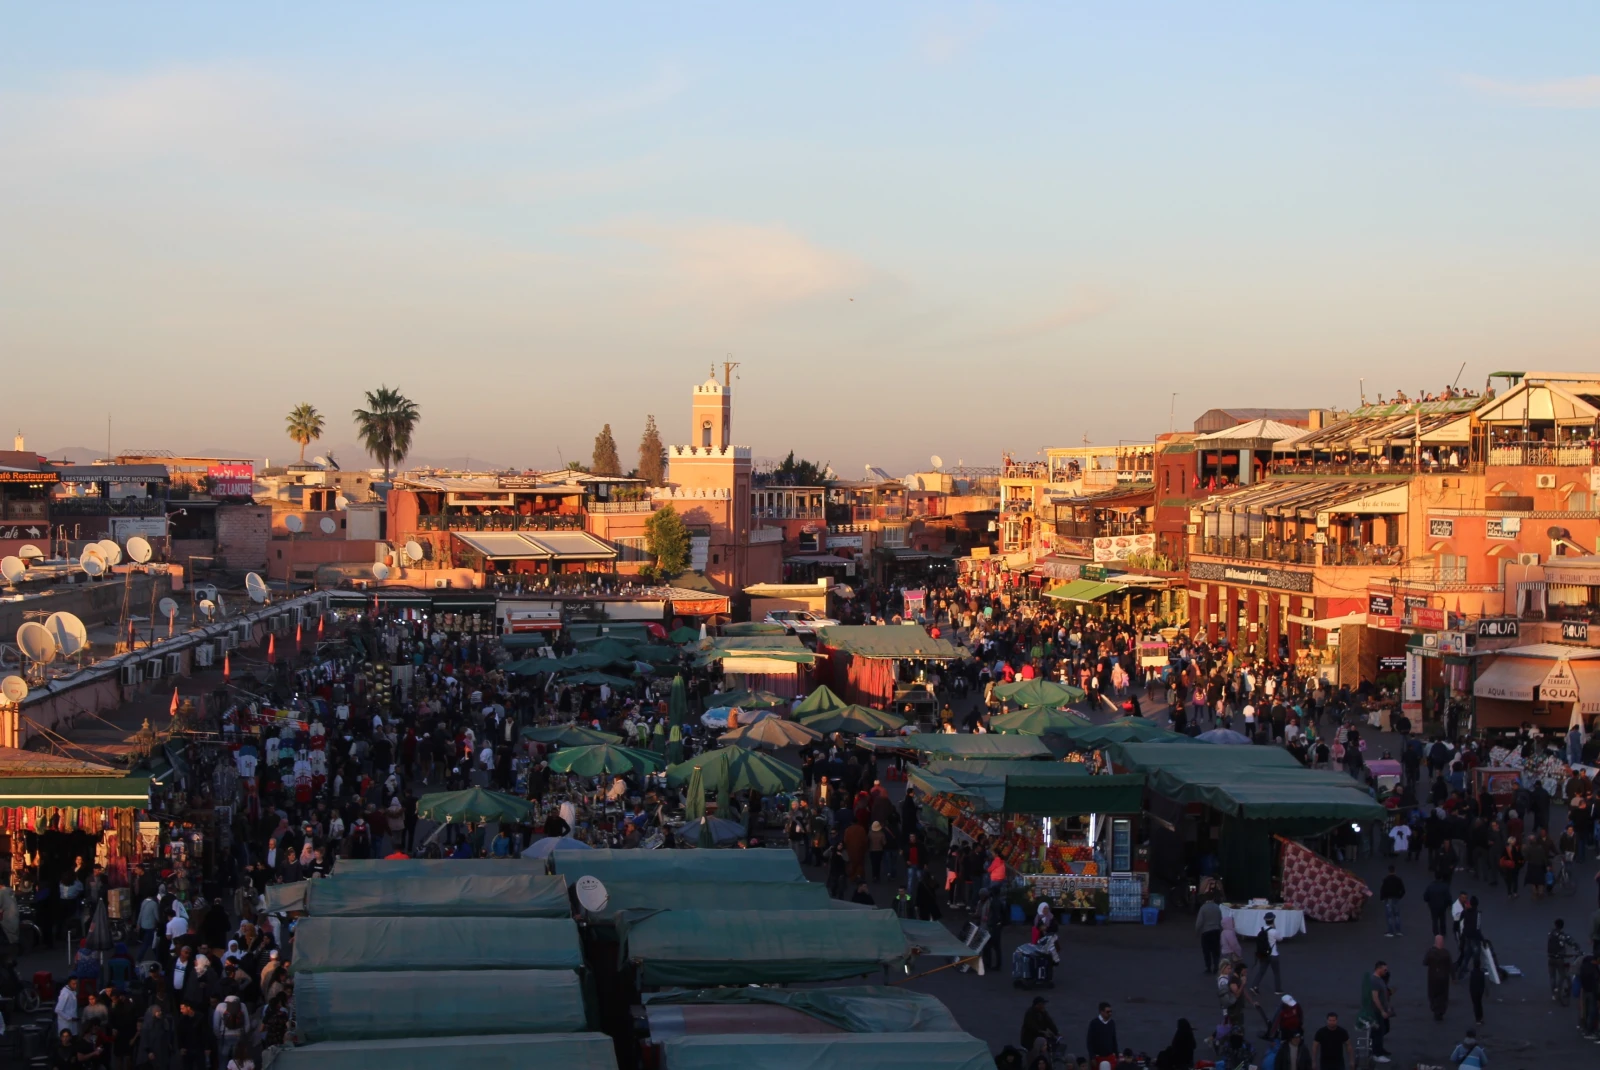 The riad views from above with lots of stalls and people. 